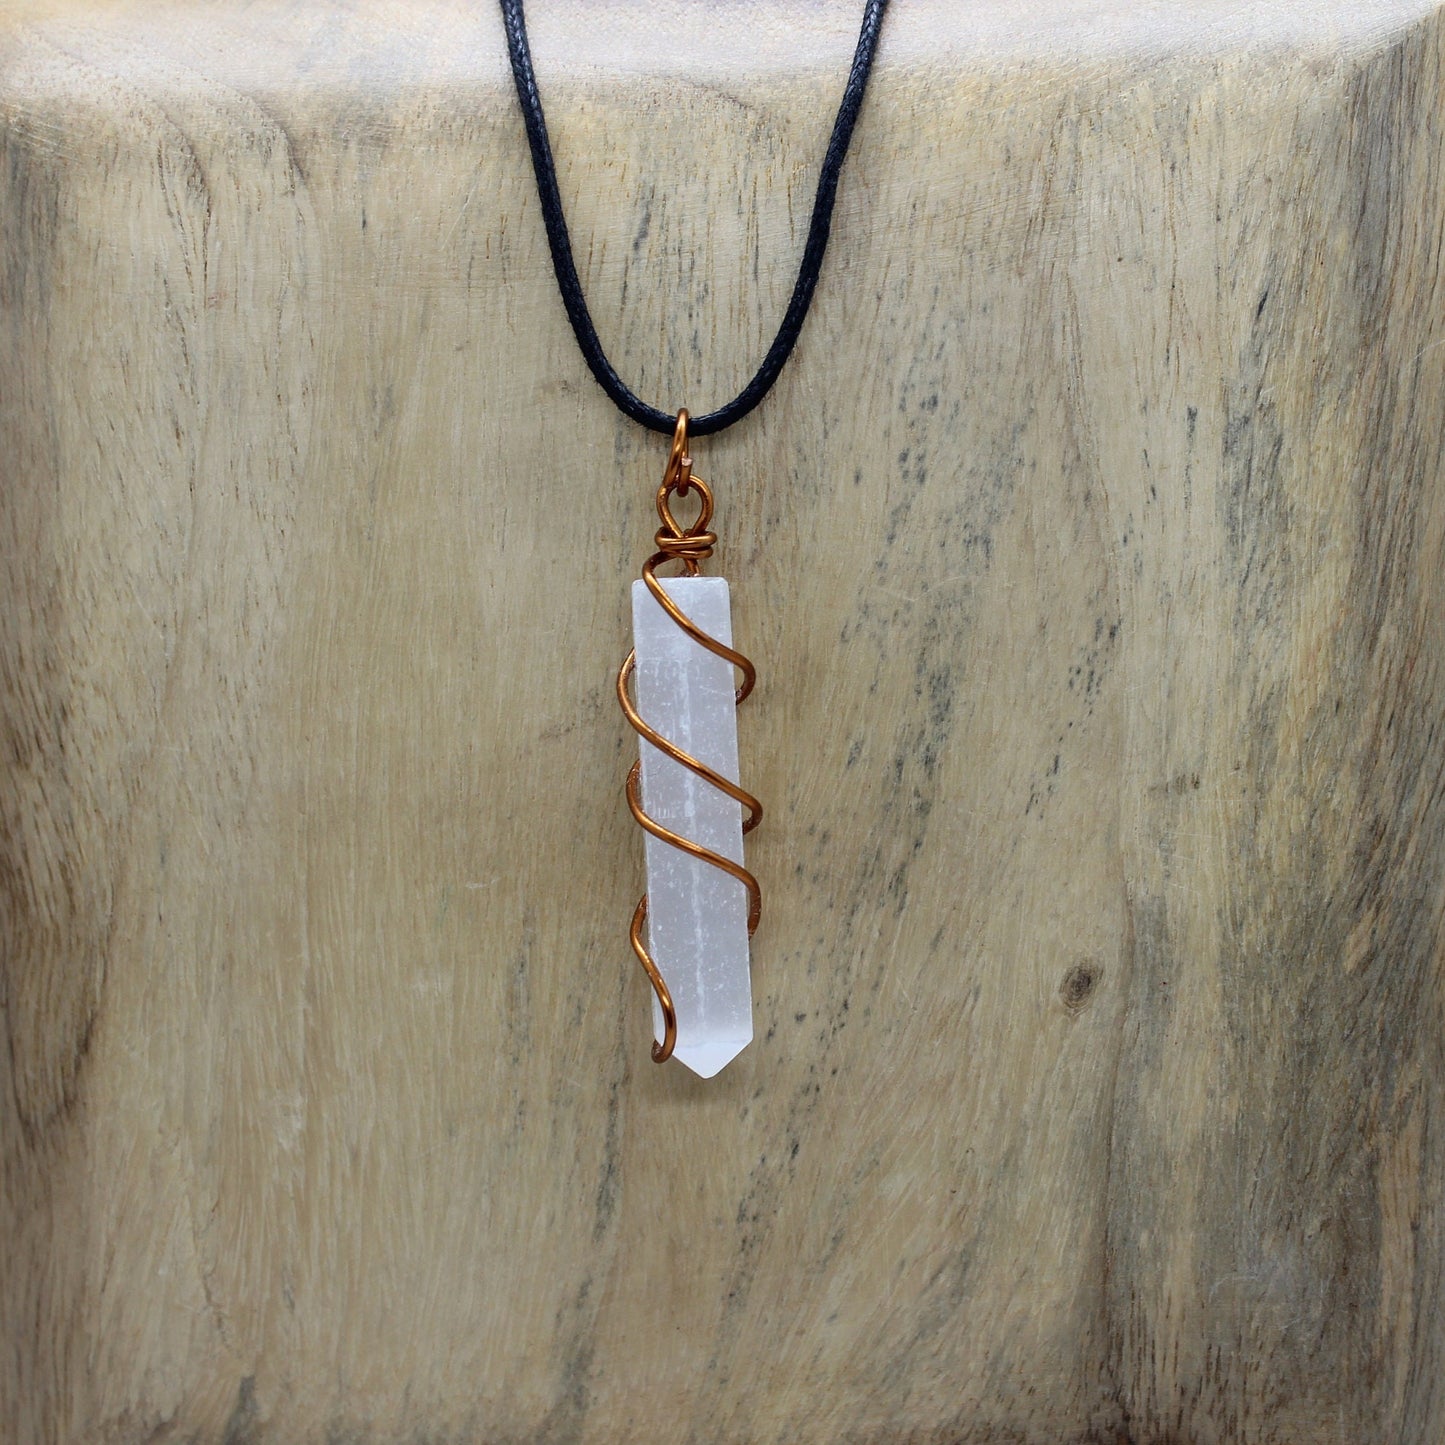 Selenite Crystal Pendant Necklace Copper wire wrapped Healing Necklace, Crystal Protection Pendant Quartz Crystal Jewellery Selenite Pendant